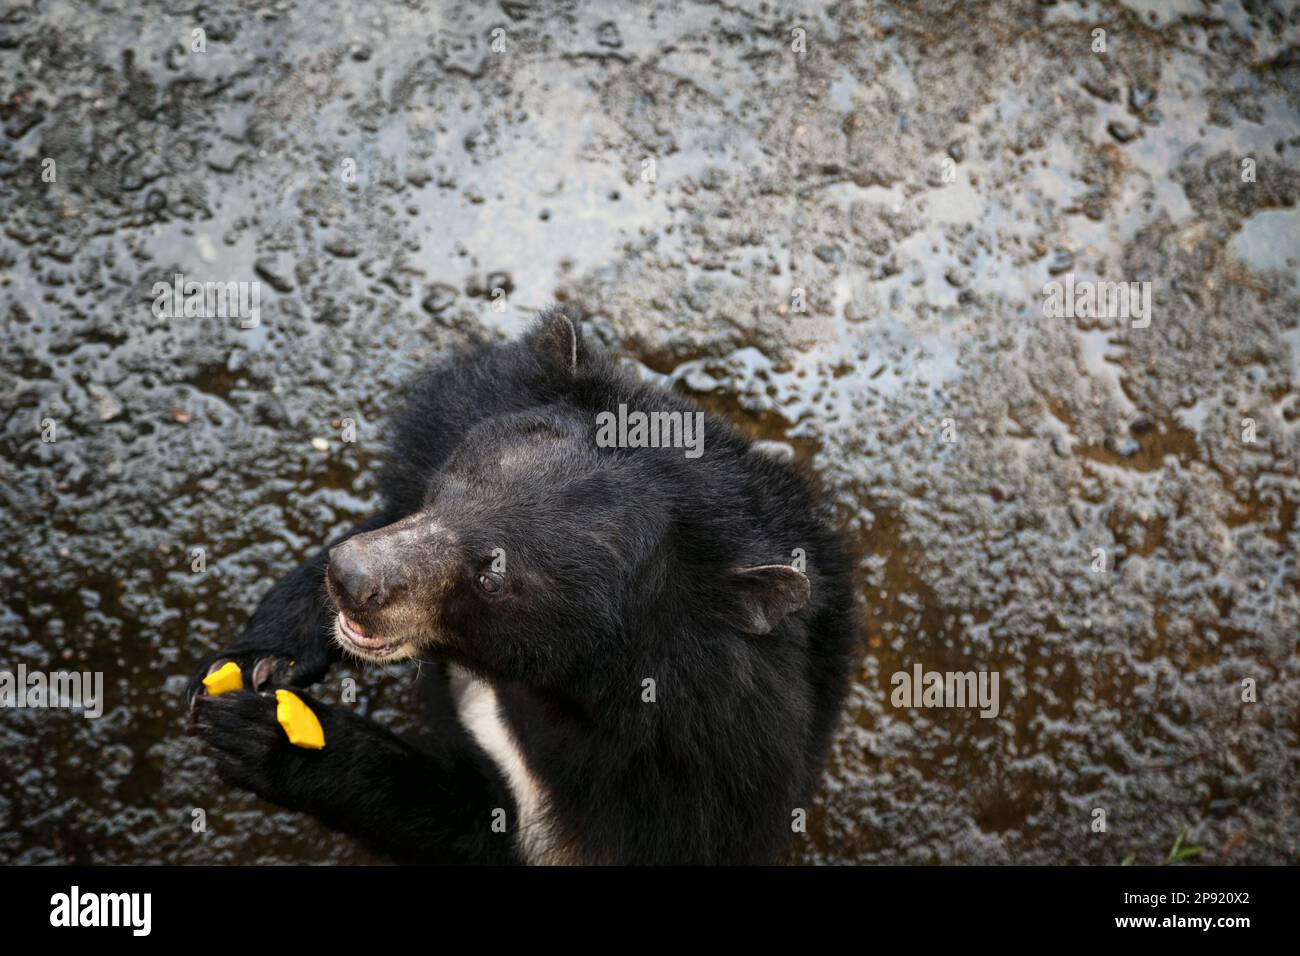 Cute Asian black bear eating a piece of pumpkin at a zoo. White chested moon bear top view close-up with a copy space Stock Photo